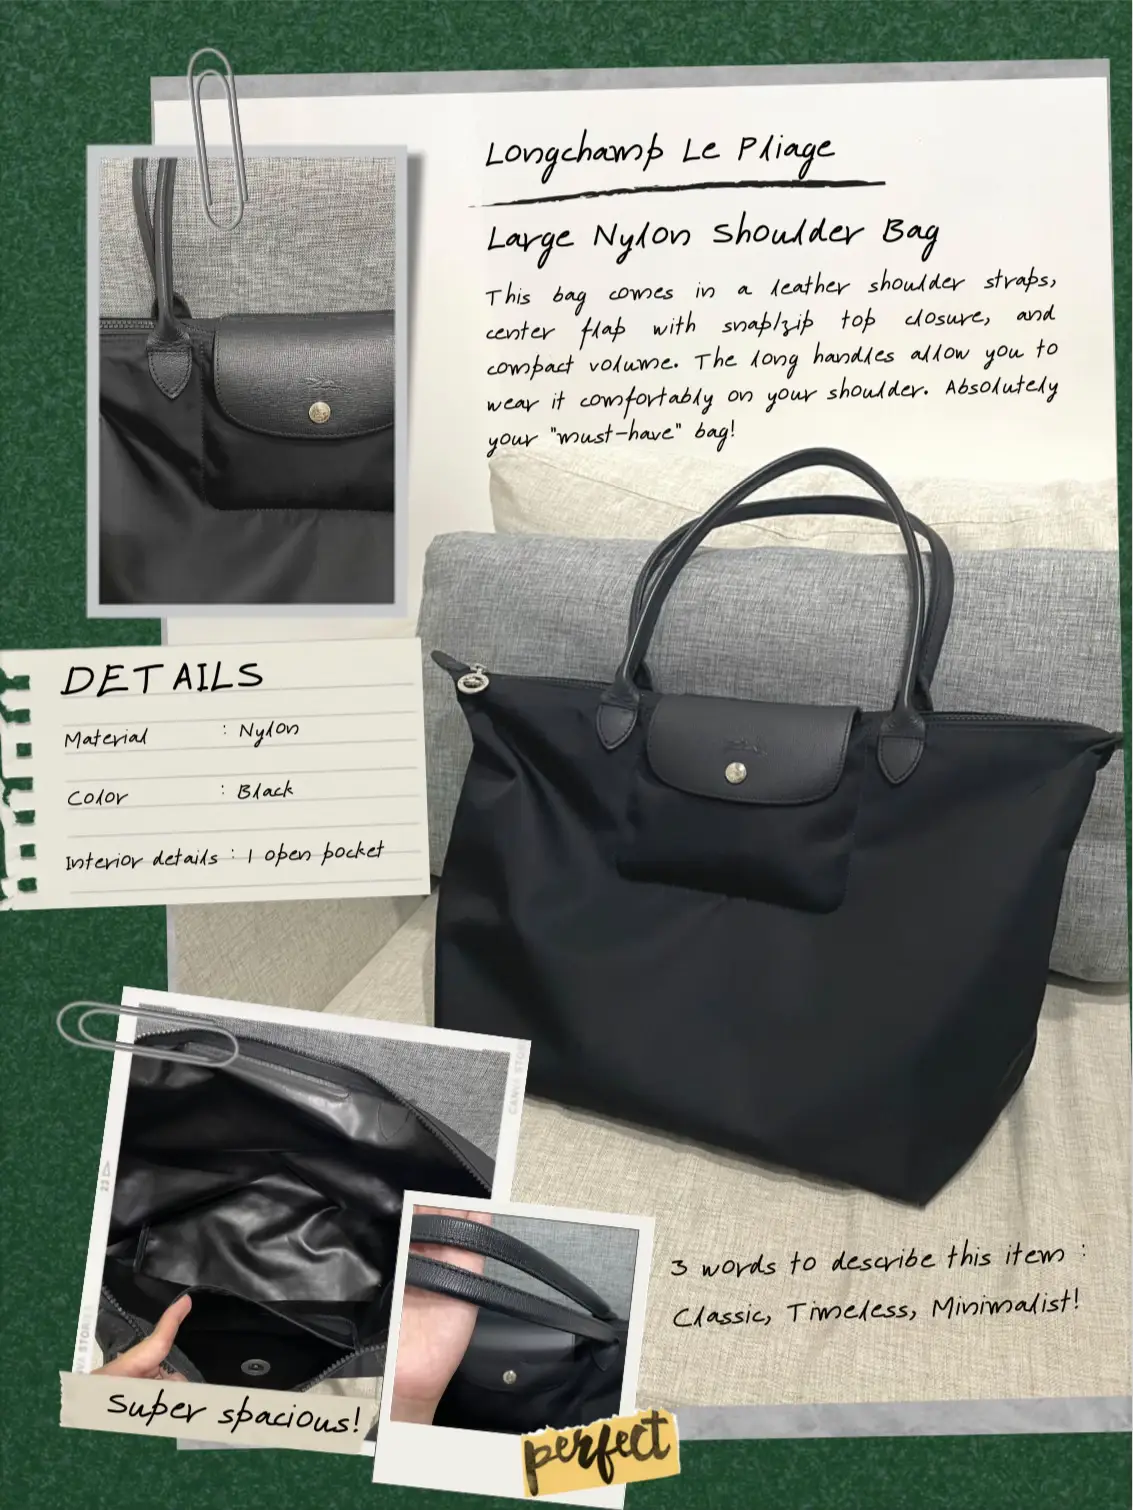 An Honest Review of the Longchamp Le Pliage Neo Small Shoulder Bag